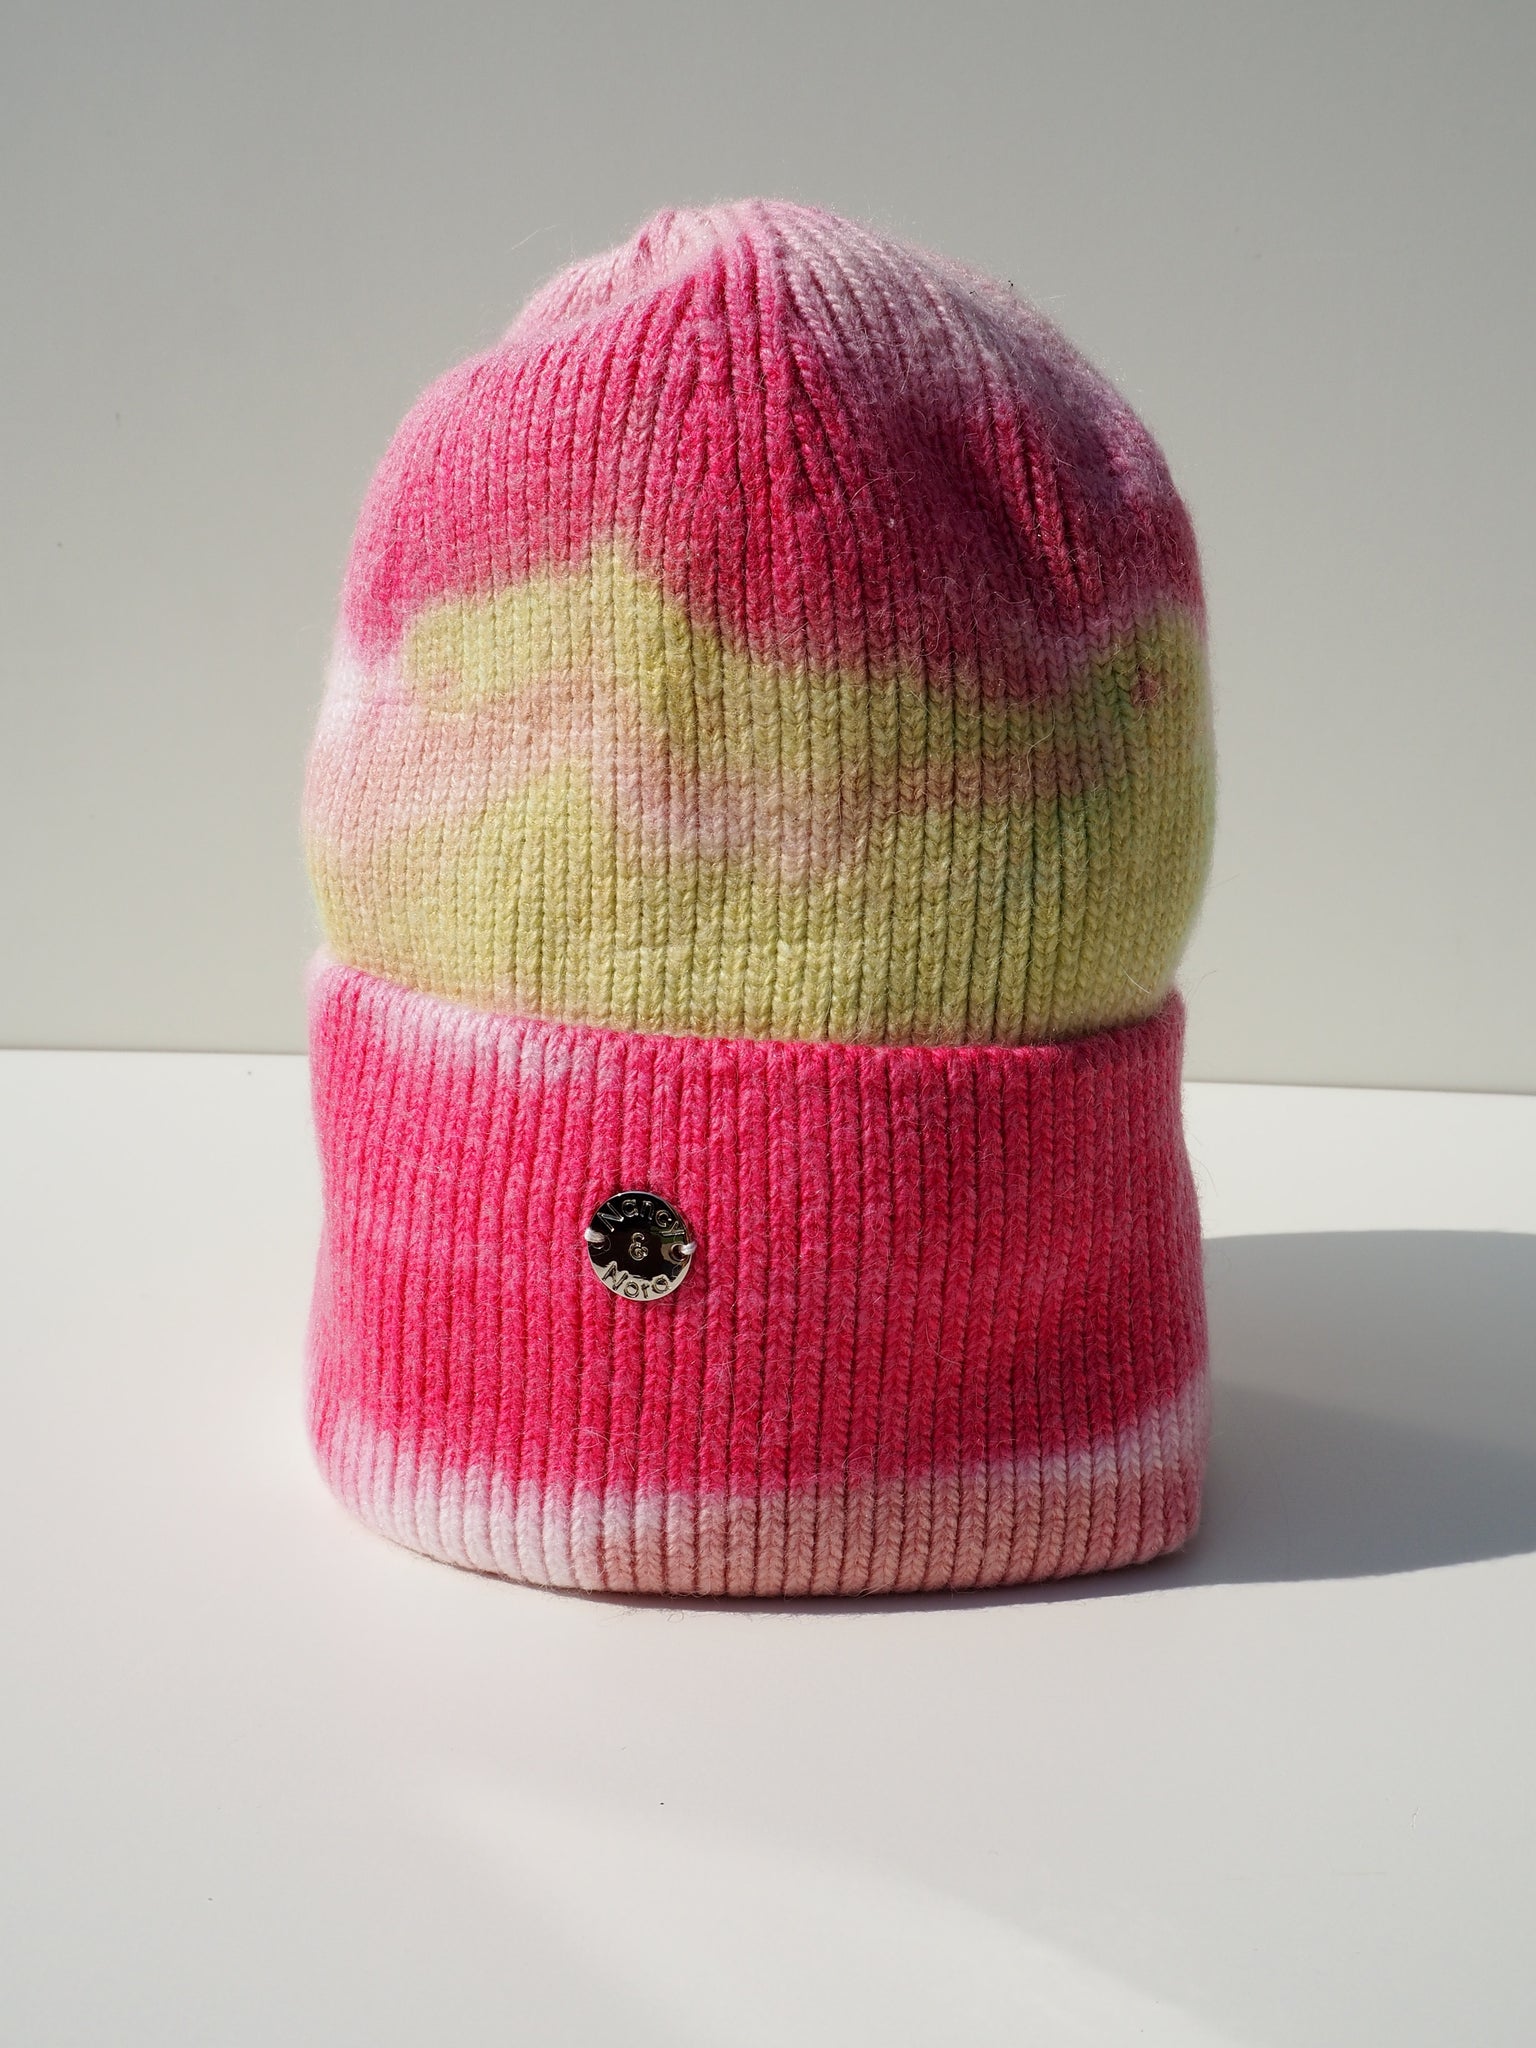 Tie Dye Beanie Pink and Green